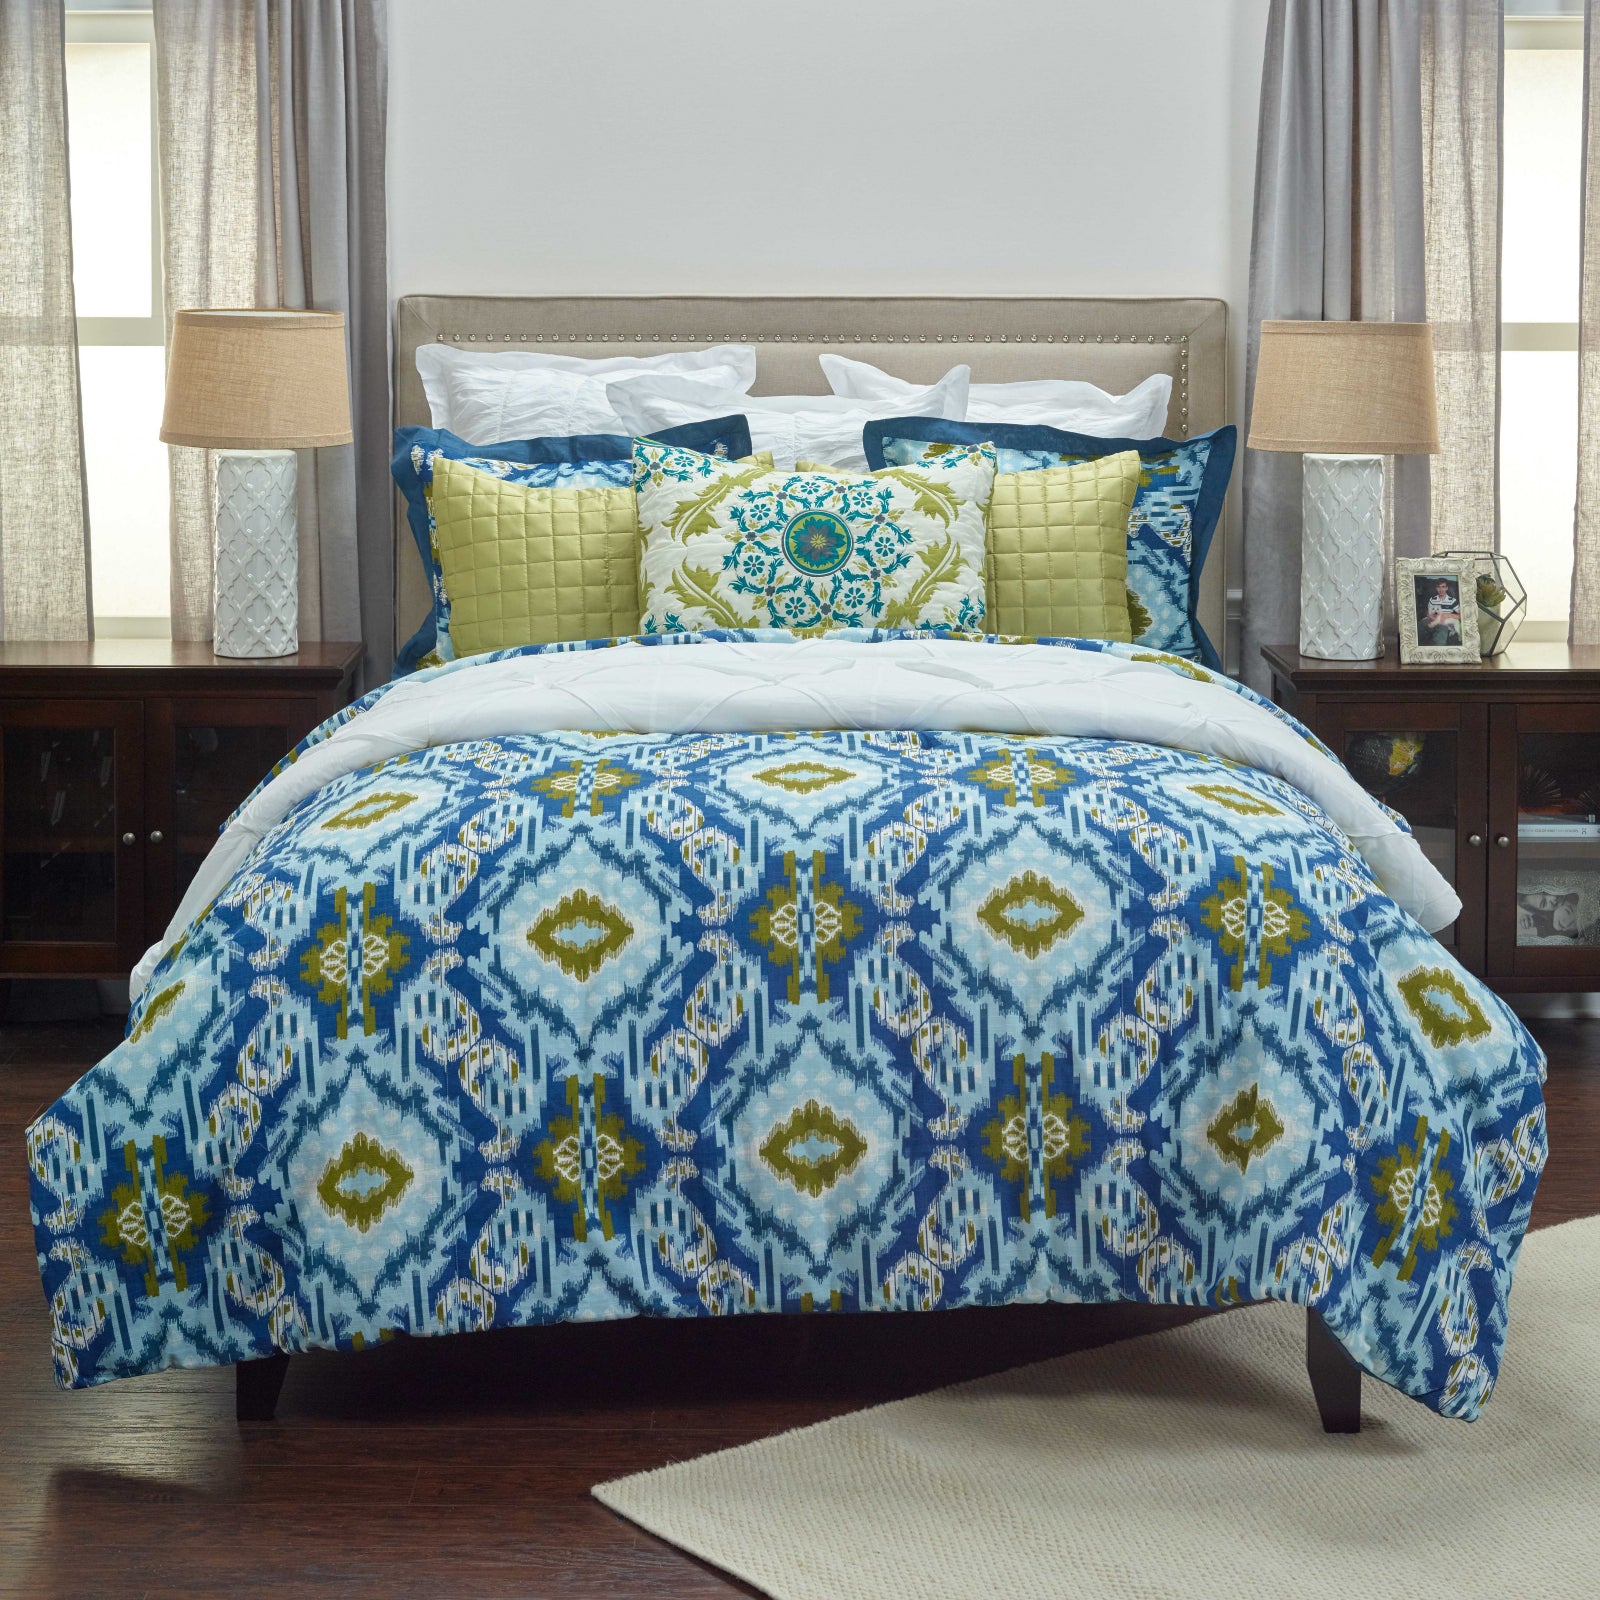 Rizzy BT1608 Seaglass Blue Bedding main image